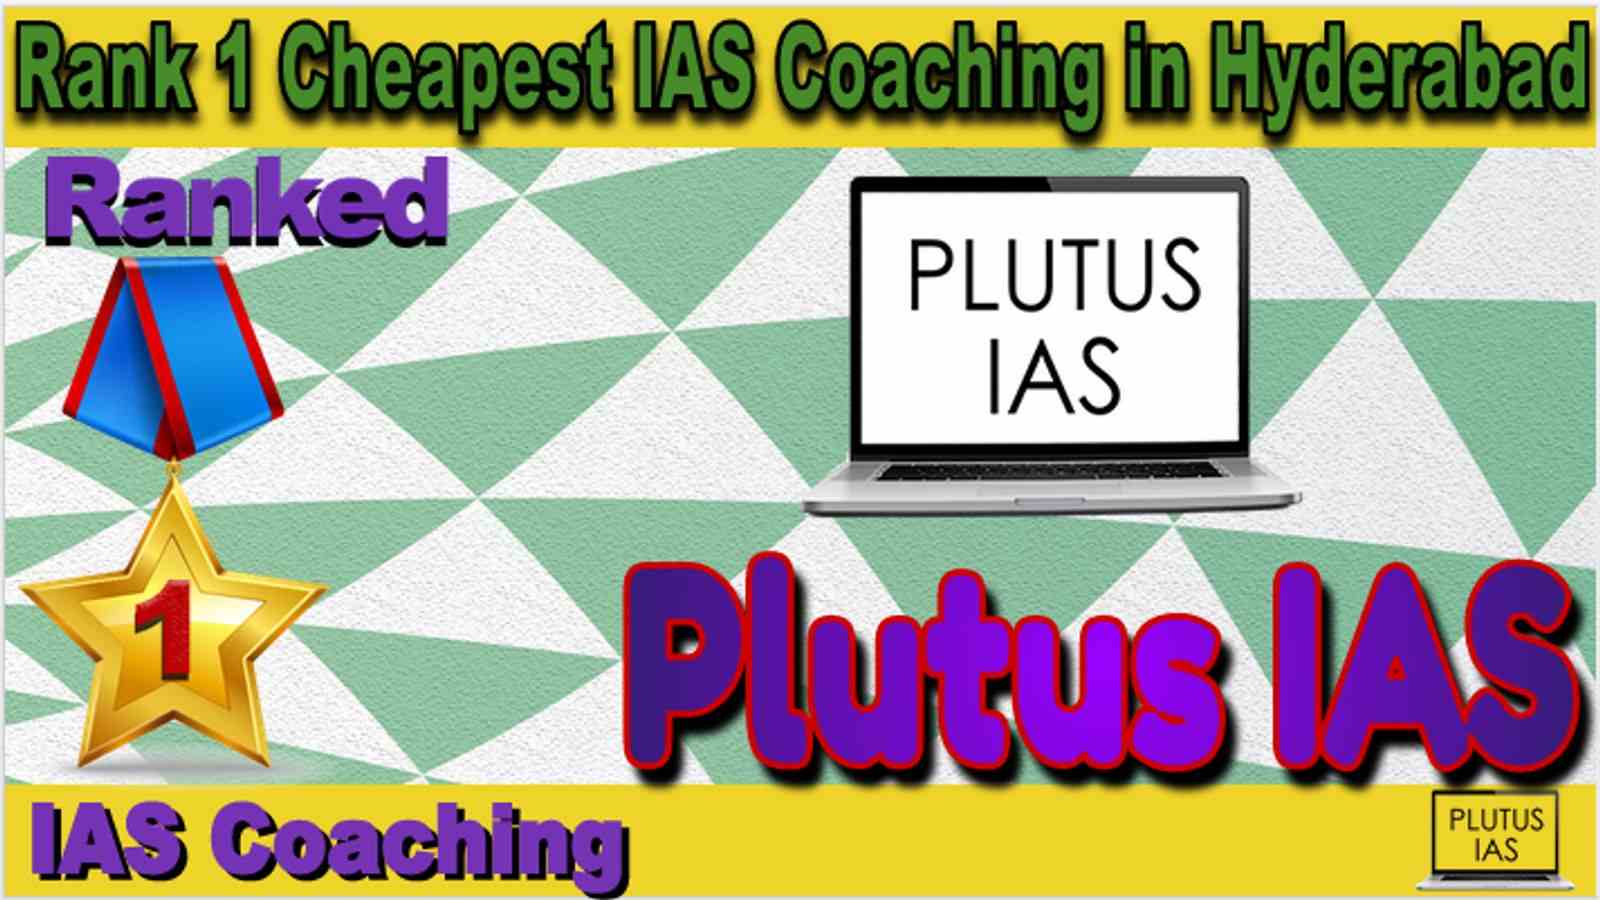 Rank 1 Cheapest IAS Coaching in Hyderabad